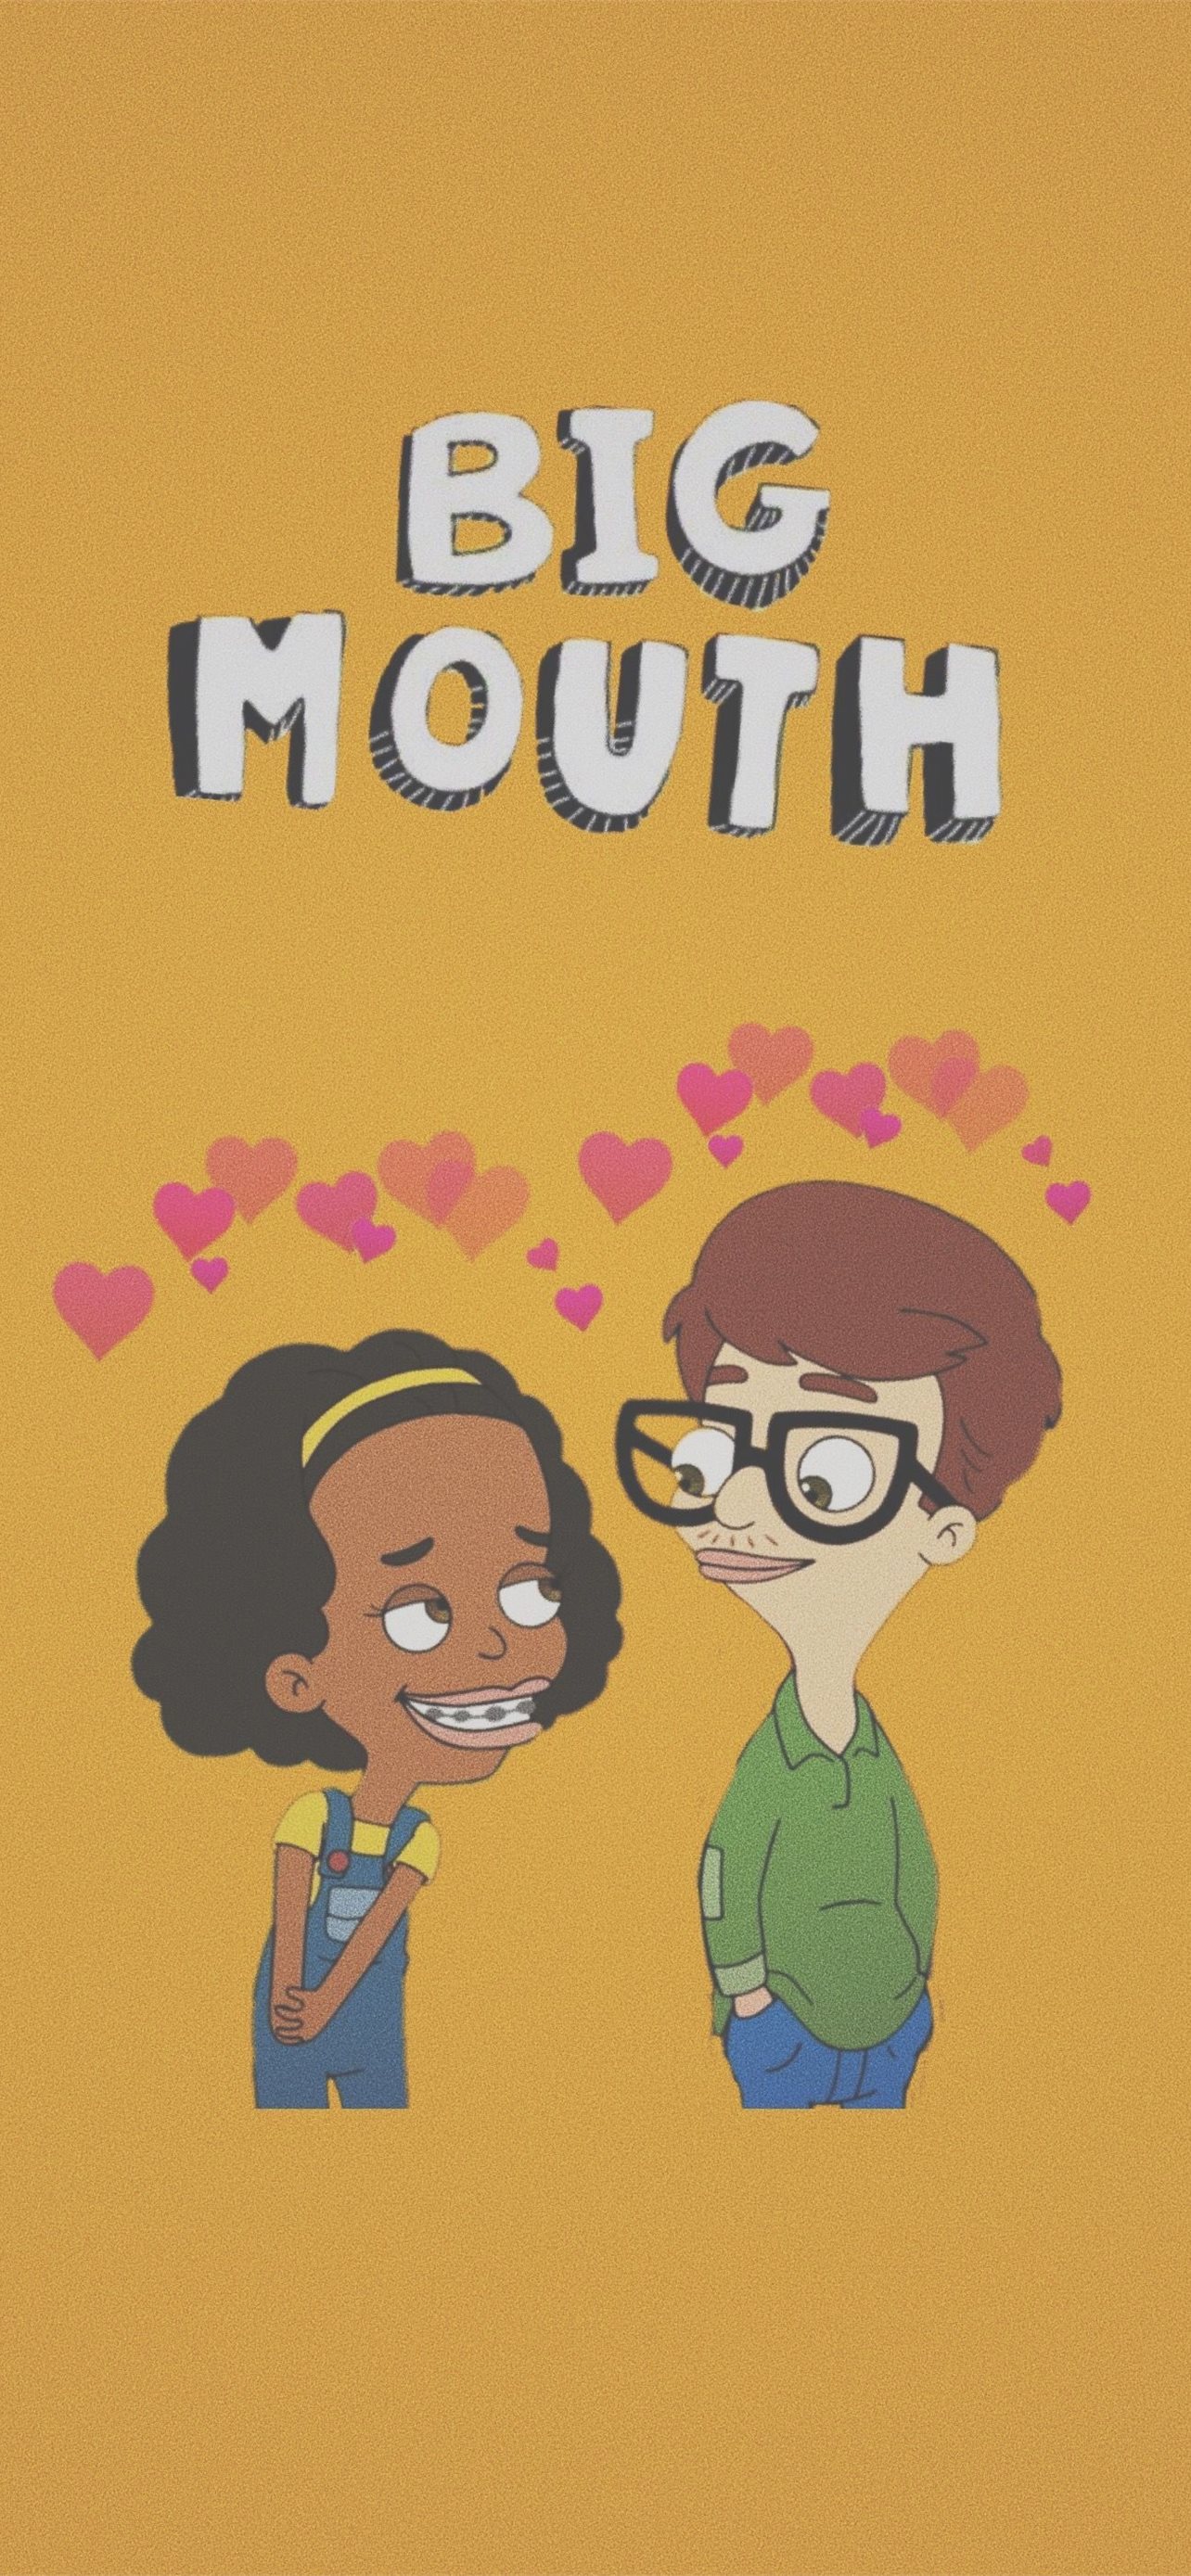 Big Mouth Background Images HD Pictures and Wallpaper For Free Download   Pngtree